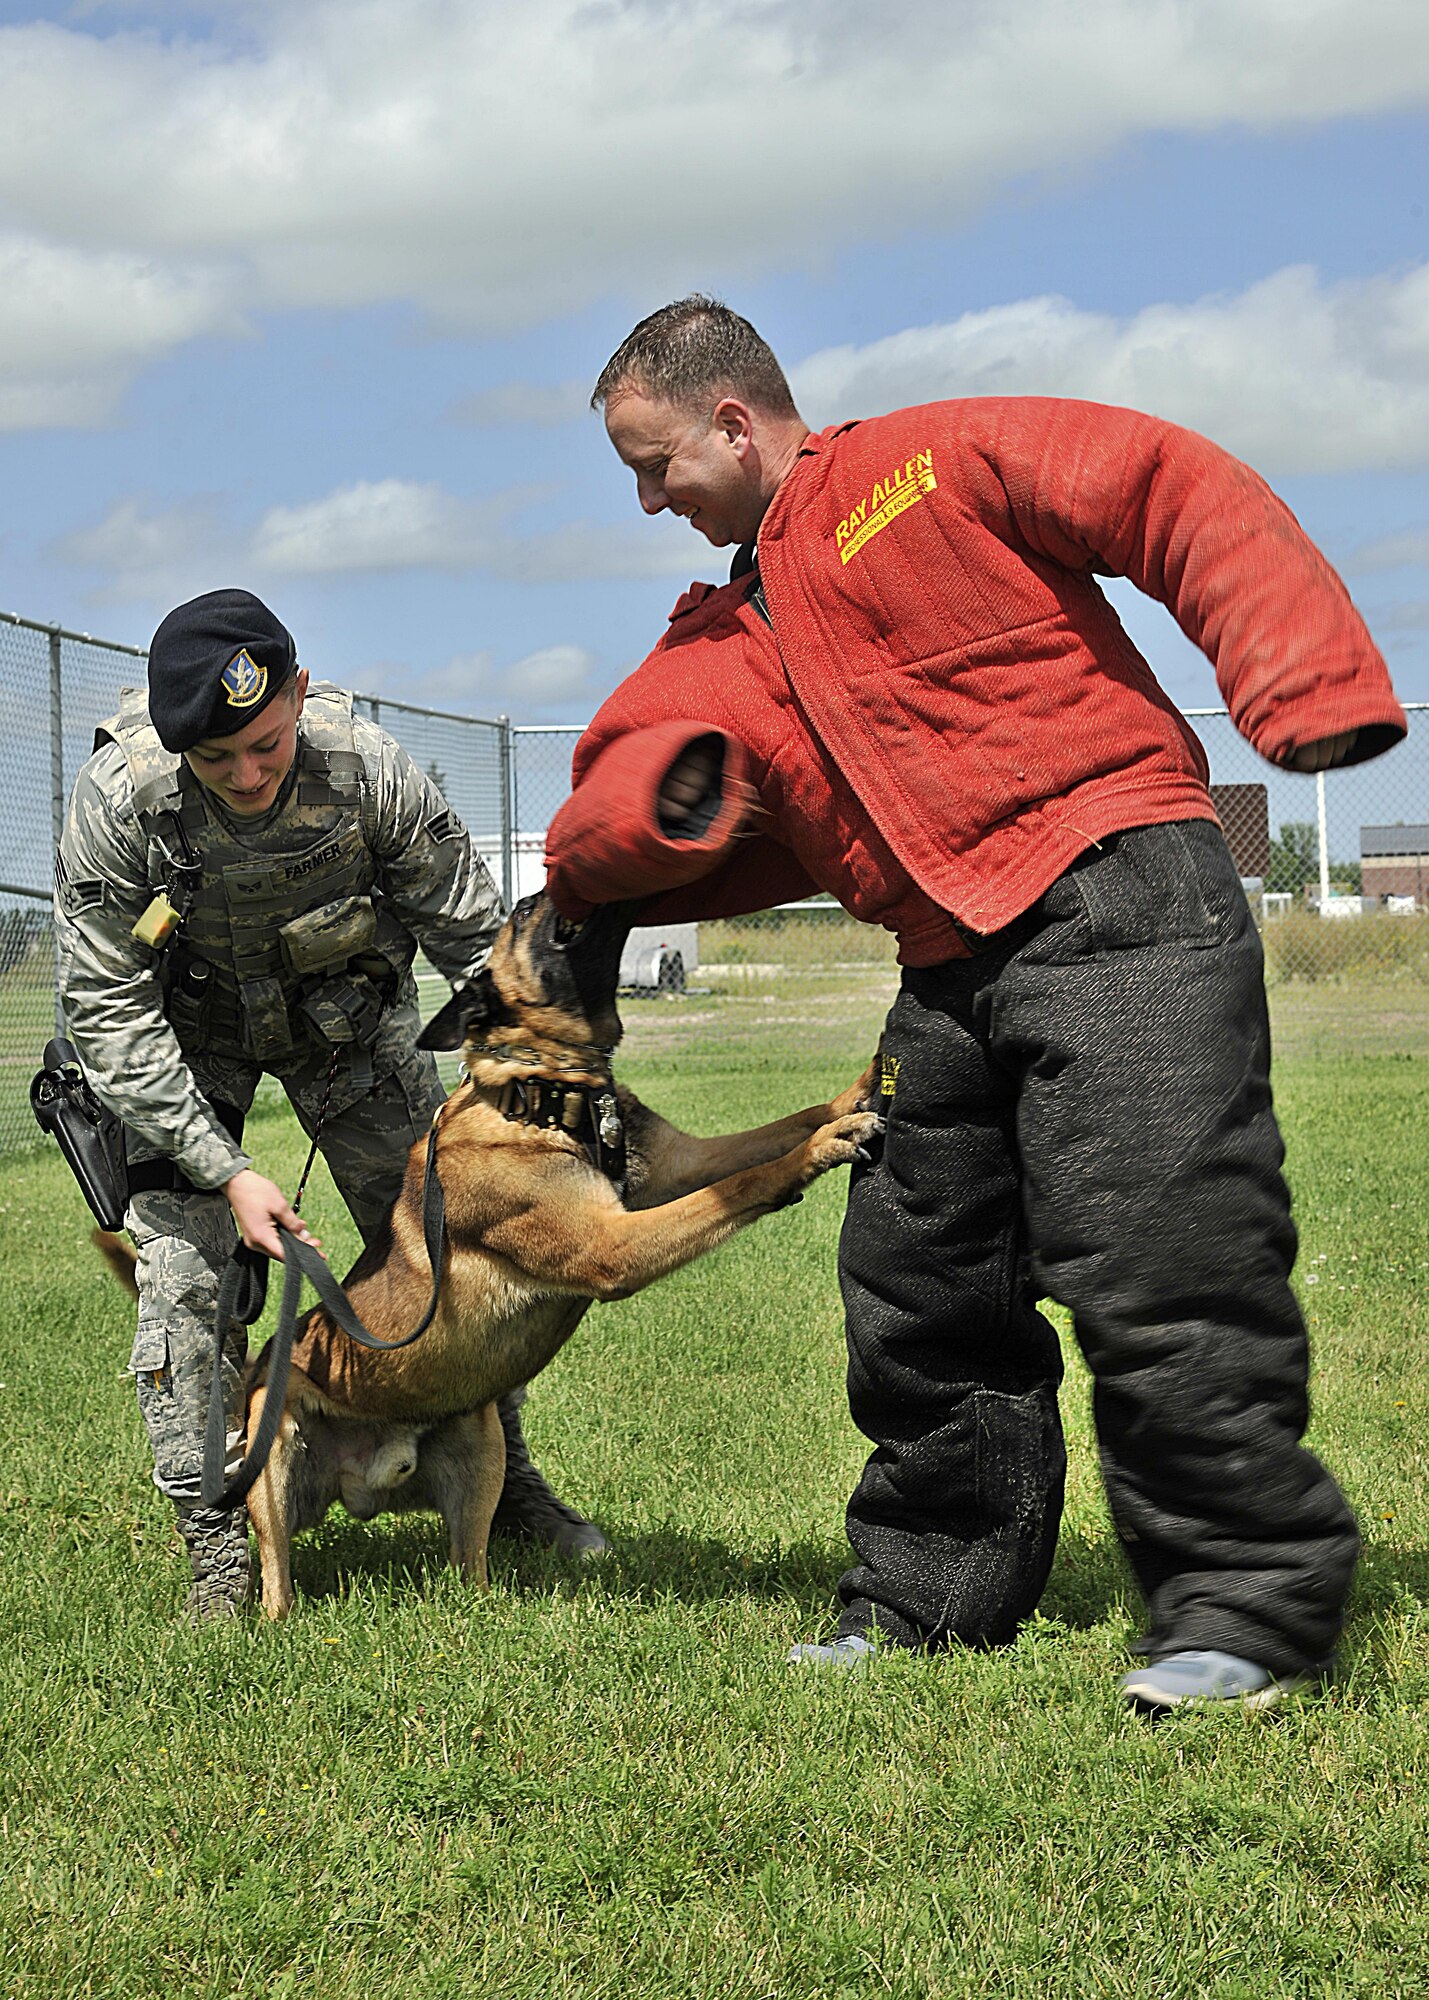 Master Sgt. Stephen Middleton, 319th Security Forces Squadron first sergeant, is attacked by Zumba, 319th SFS military working dog, as Senior Airman Katelyn Farmer, 319th SFS MWD handler, stands by to give her K-9 the next command, Aug. 10, 2016, on Grand Forks Air Force Base, N.D. Middleton has been assigned to the 319th SFS for more than a year as a first sergeant. He is showing his appreciation to his defenders by performing different aspects of their career field. (U.S. Air Force photo by Senior Airman Xavier Navarro/Released)